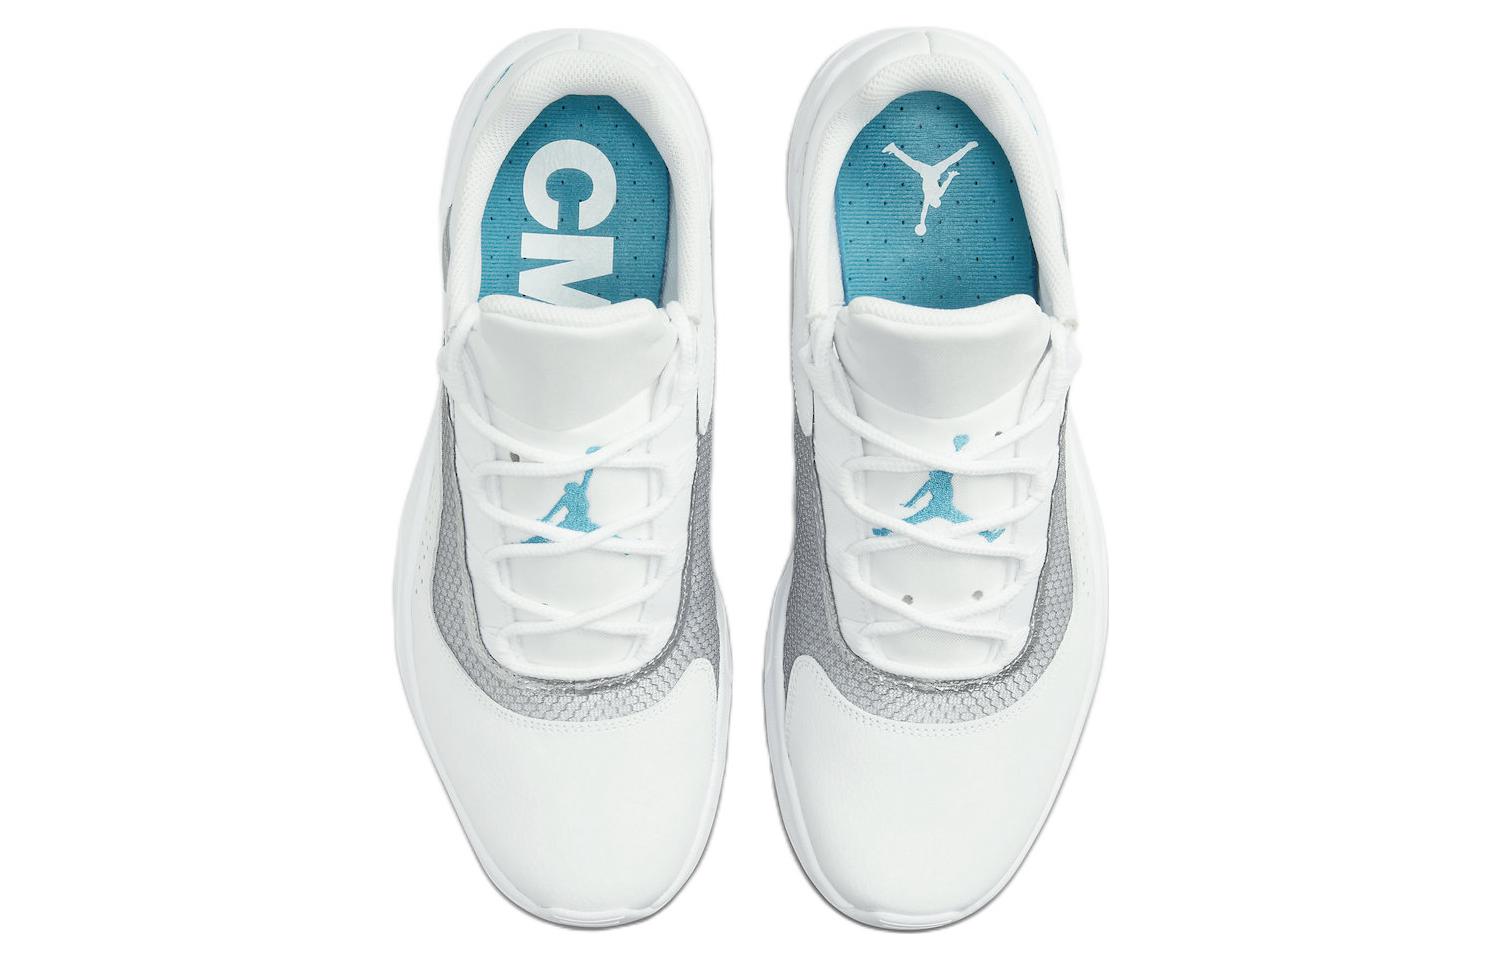 Air Jordan 11 CMFT Low \'White Neo Turquoise\'  DX9259-100 Epoch-Defining Shoes